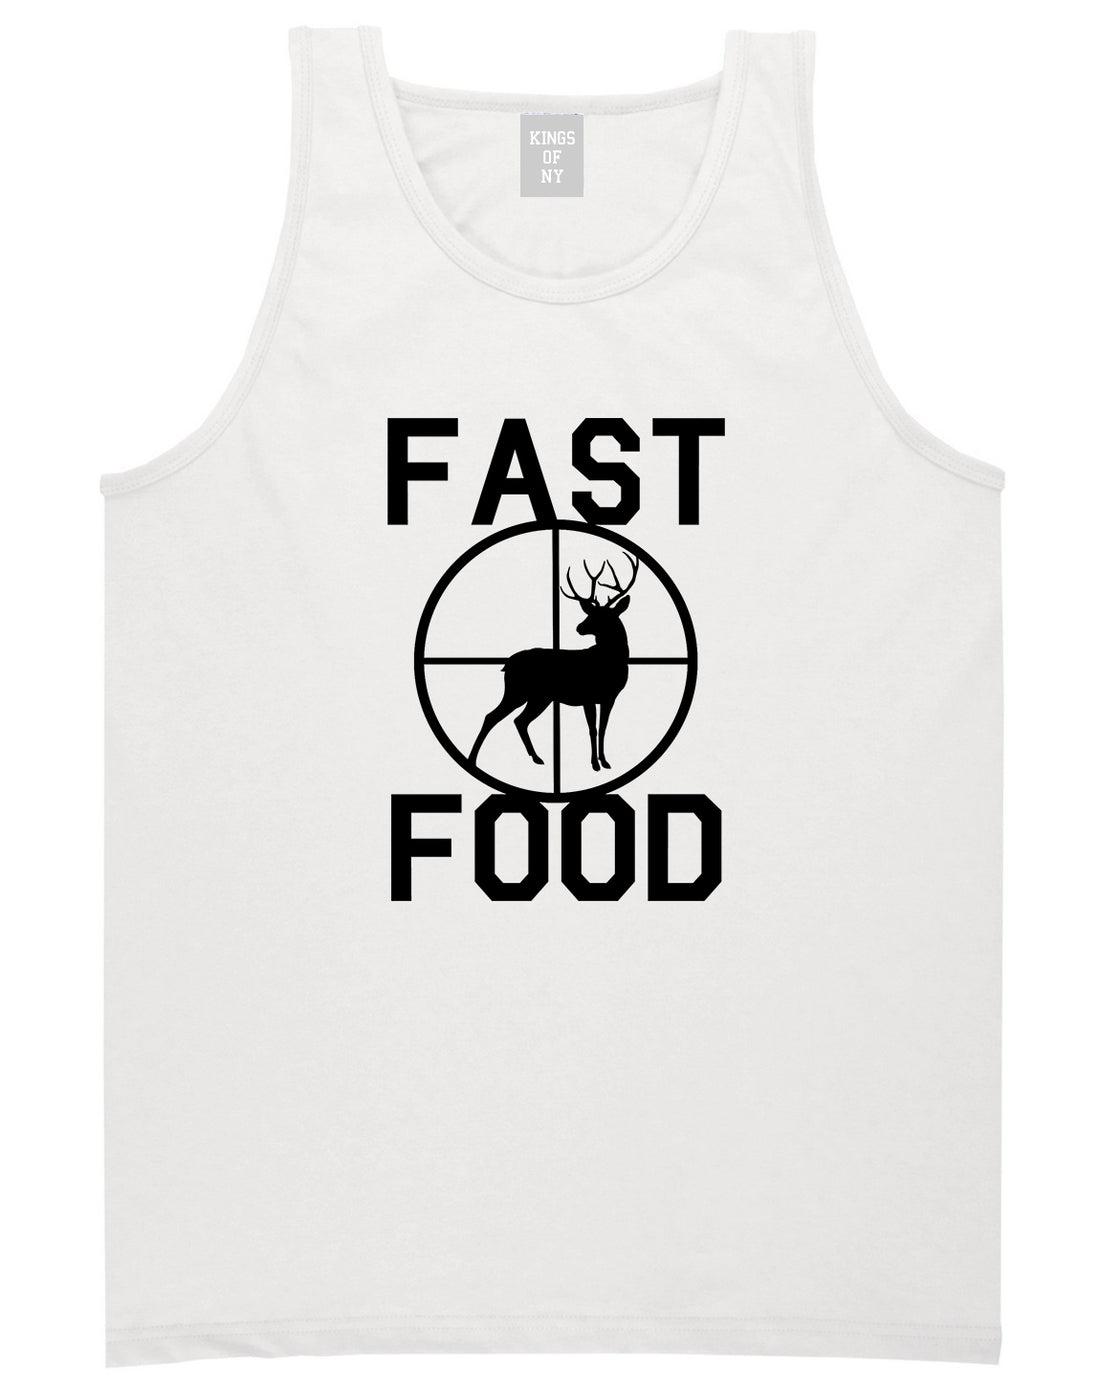 Fast Food Deer Hunting Mens White Tank Top Shirt by KINGS OF NY